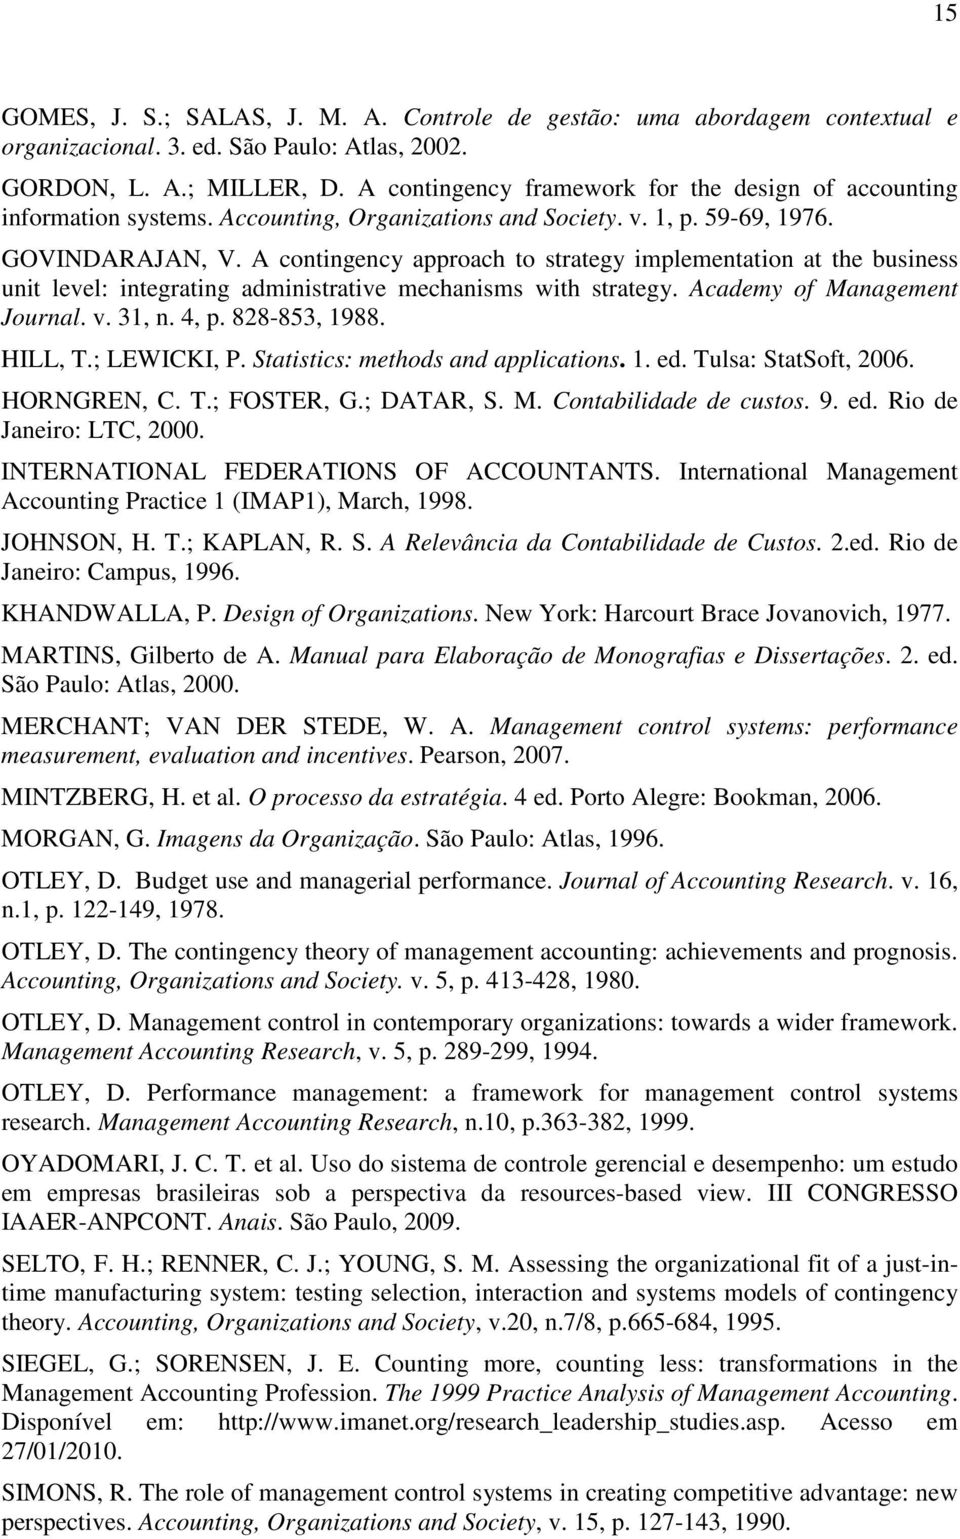 A contingency approach to strategy implementation at the business unit level: integrating administrative mechanisms with strategy. Academy of Management Journal. v. 31, n. 4, p. 828-853, 1988.